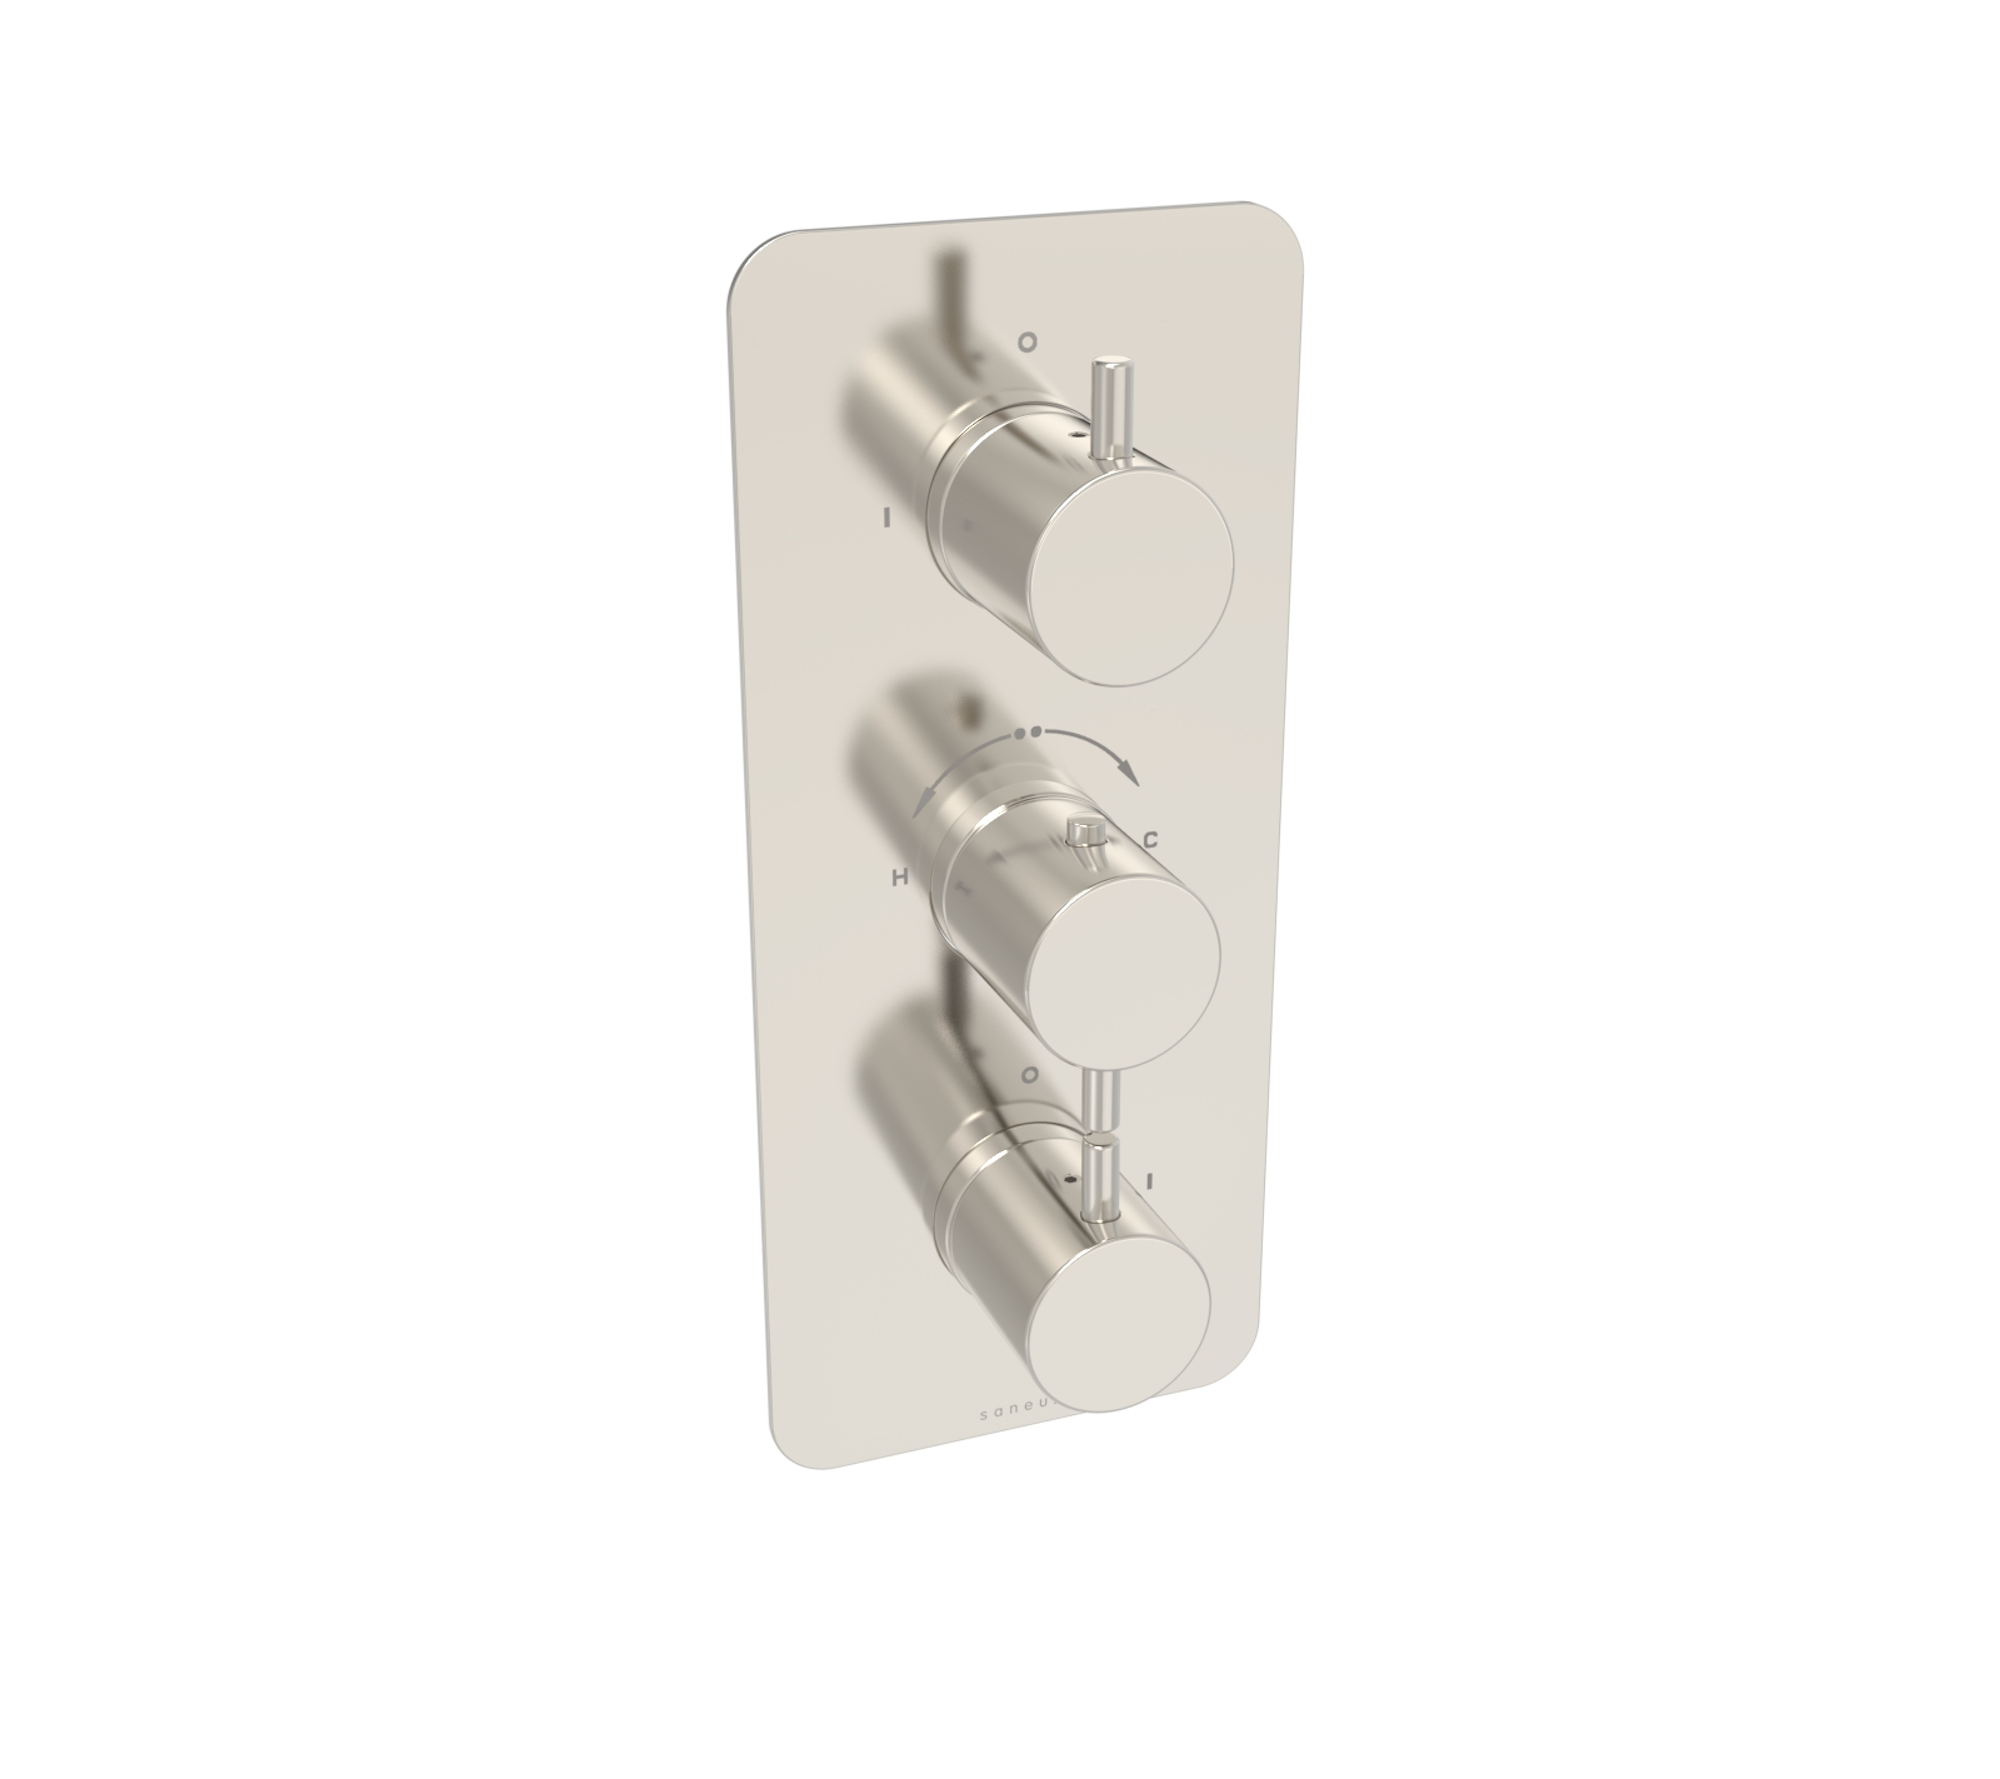 COS 3-way thermostatic shower valve kit - Brushed Nickel